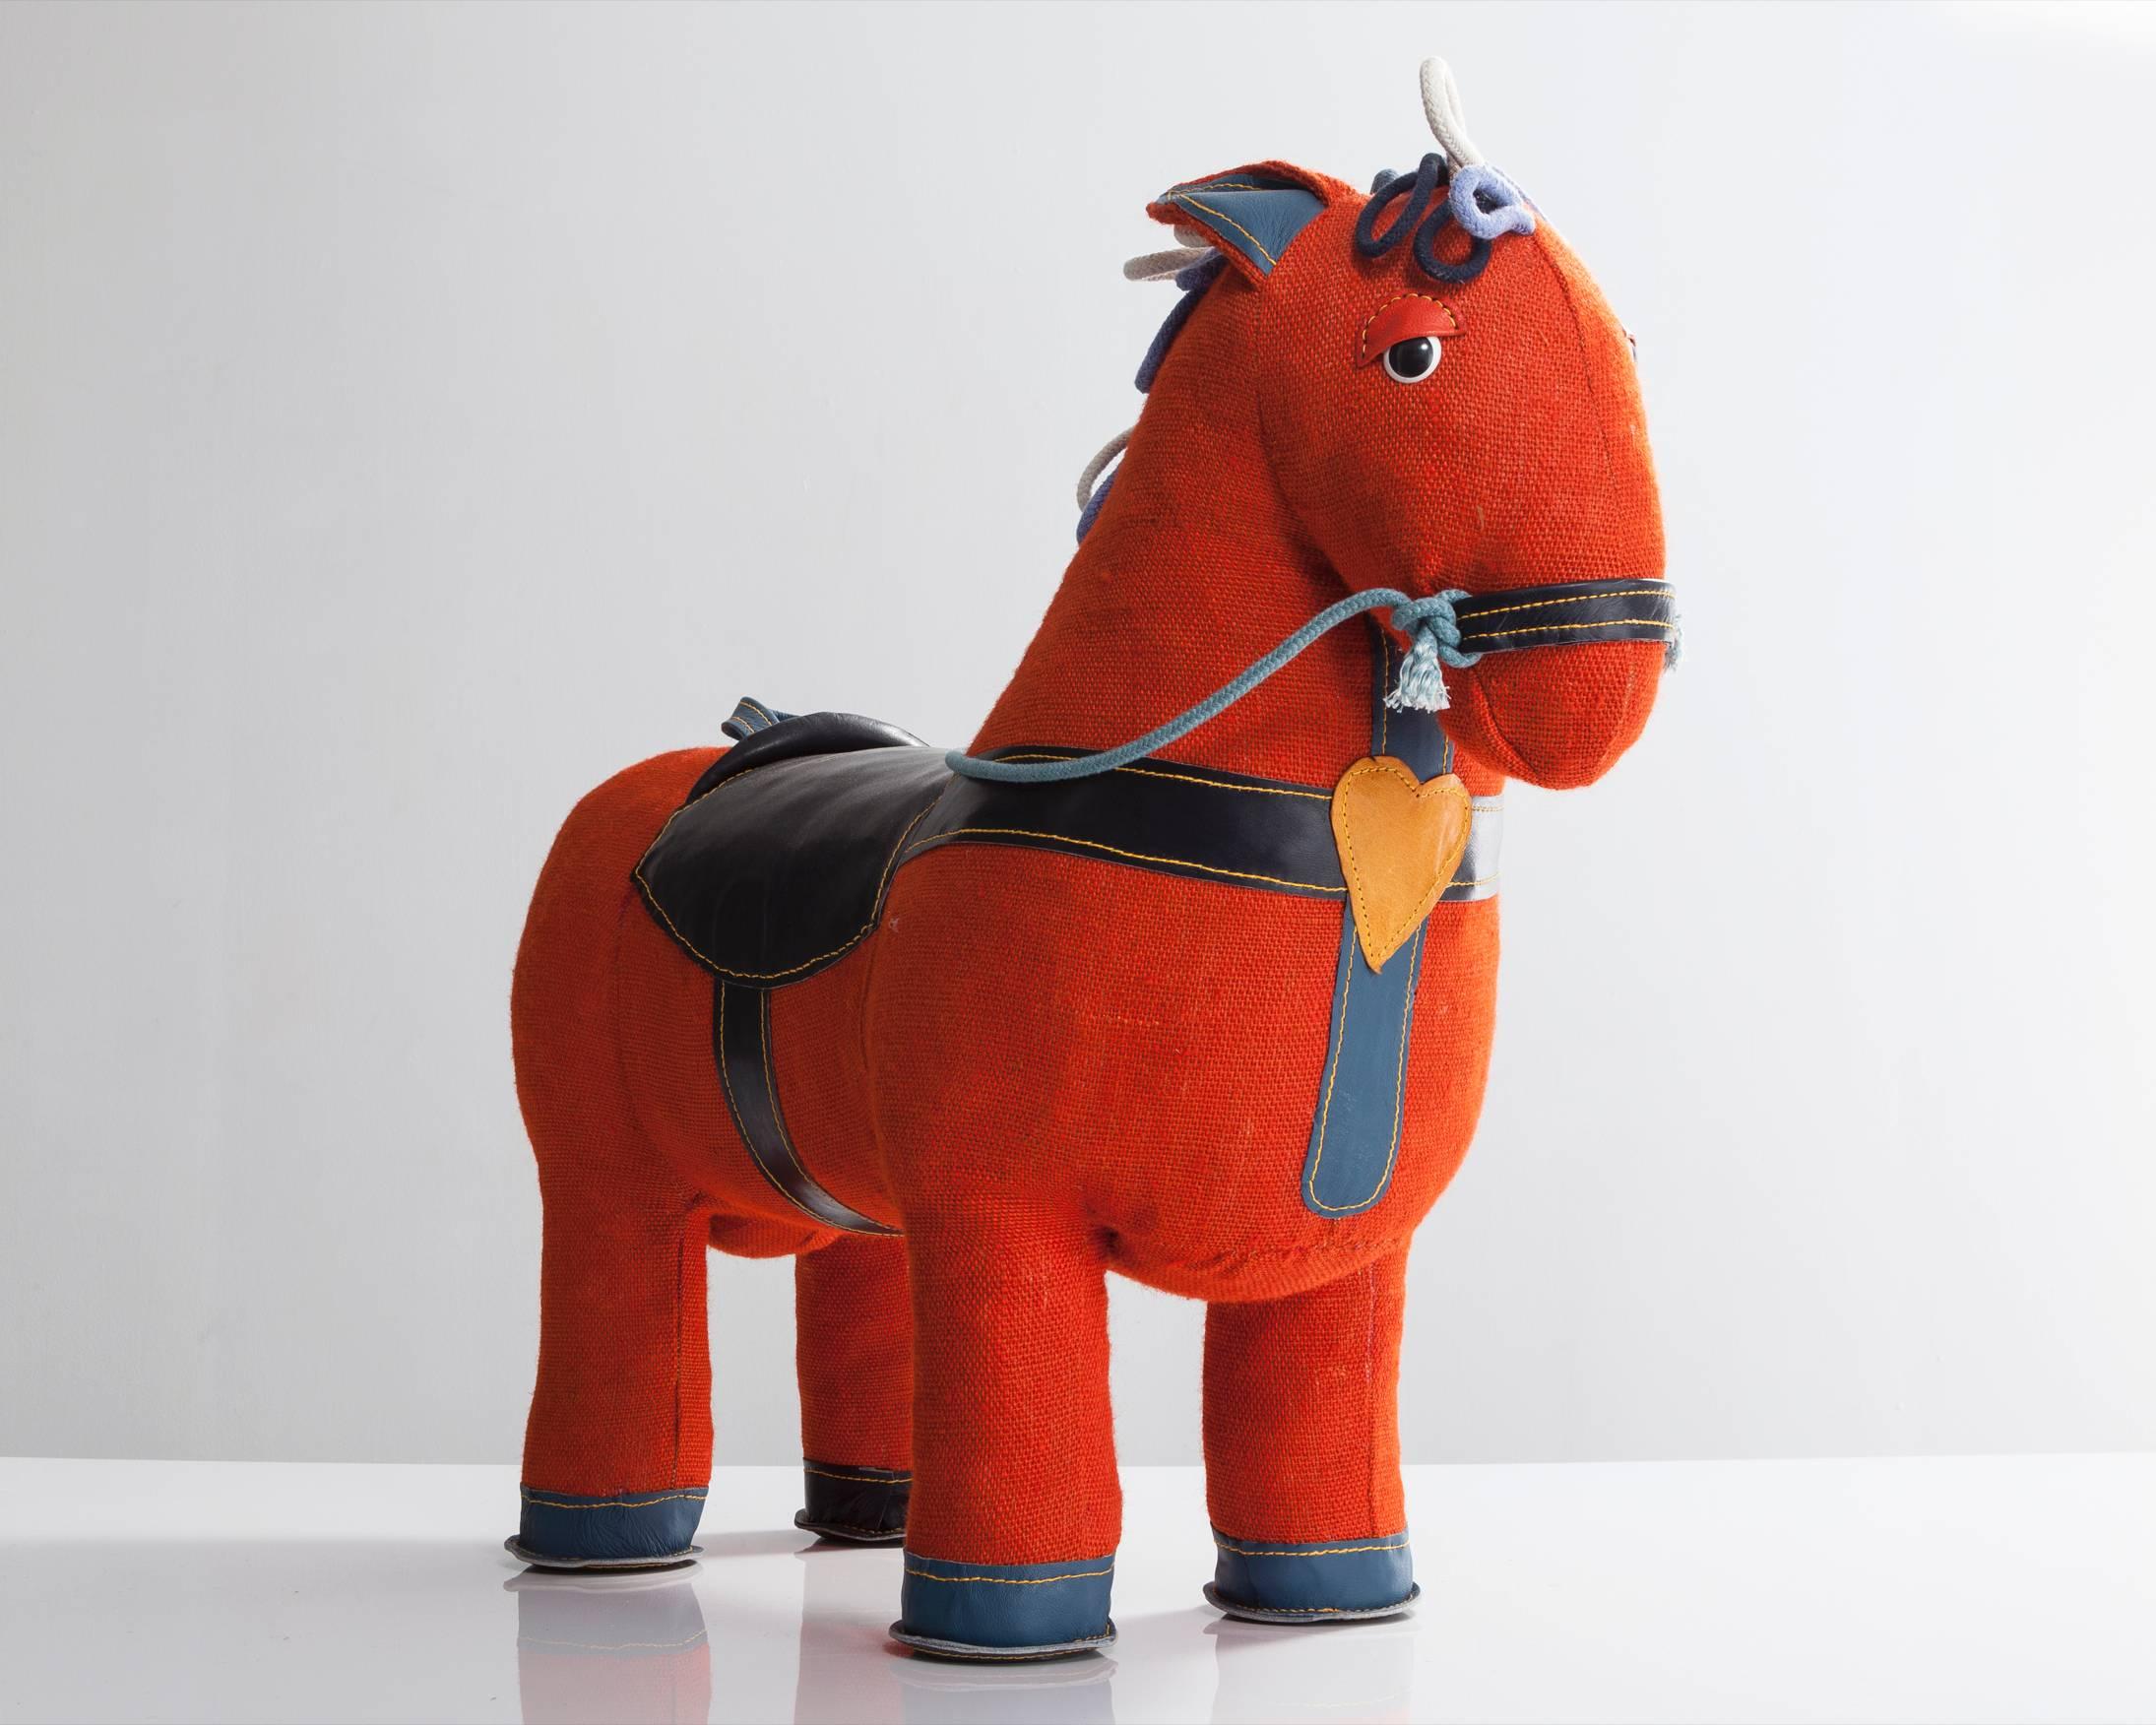 Therapeutic toy magic horse in orange jute with black leather detailing. Designed and made by Renate Müller, Germany, 2015.